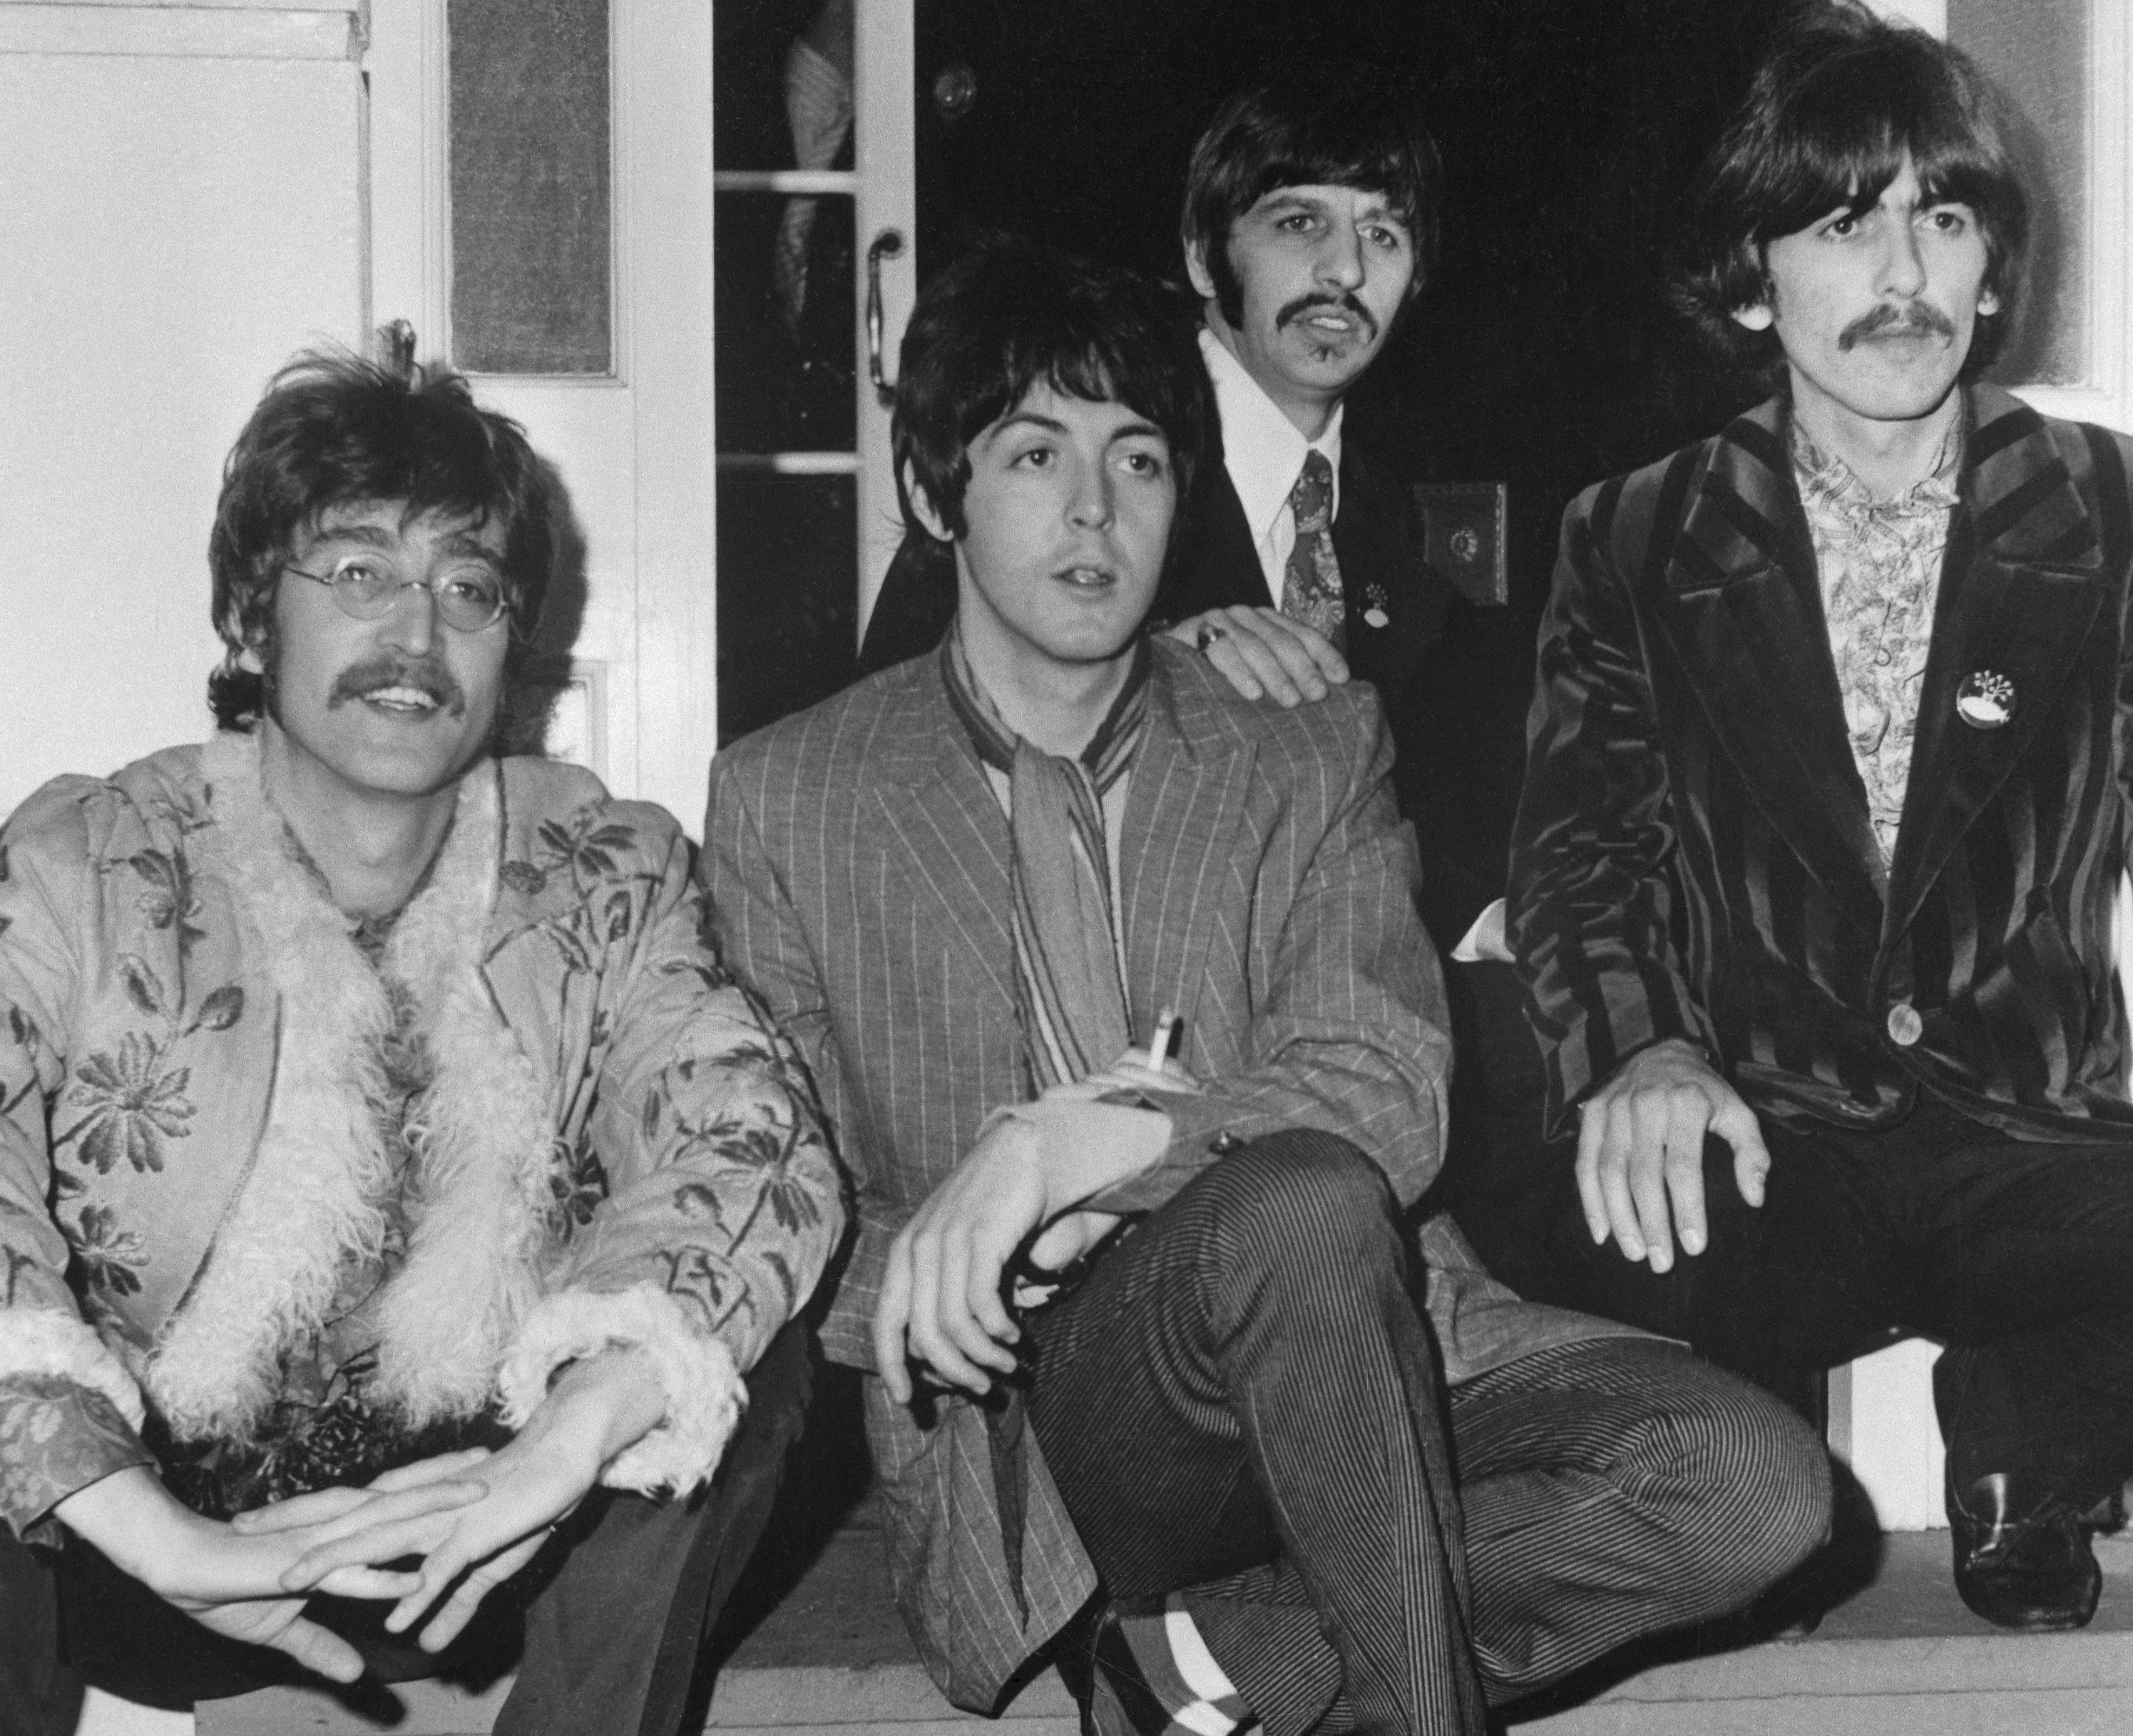 The Beatles in black-and-white during the "Get Back" era